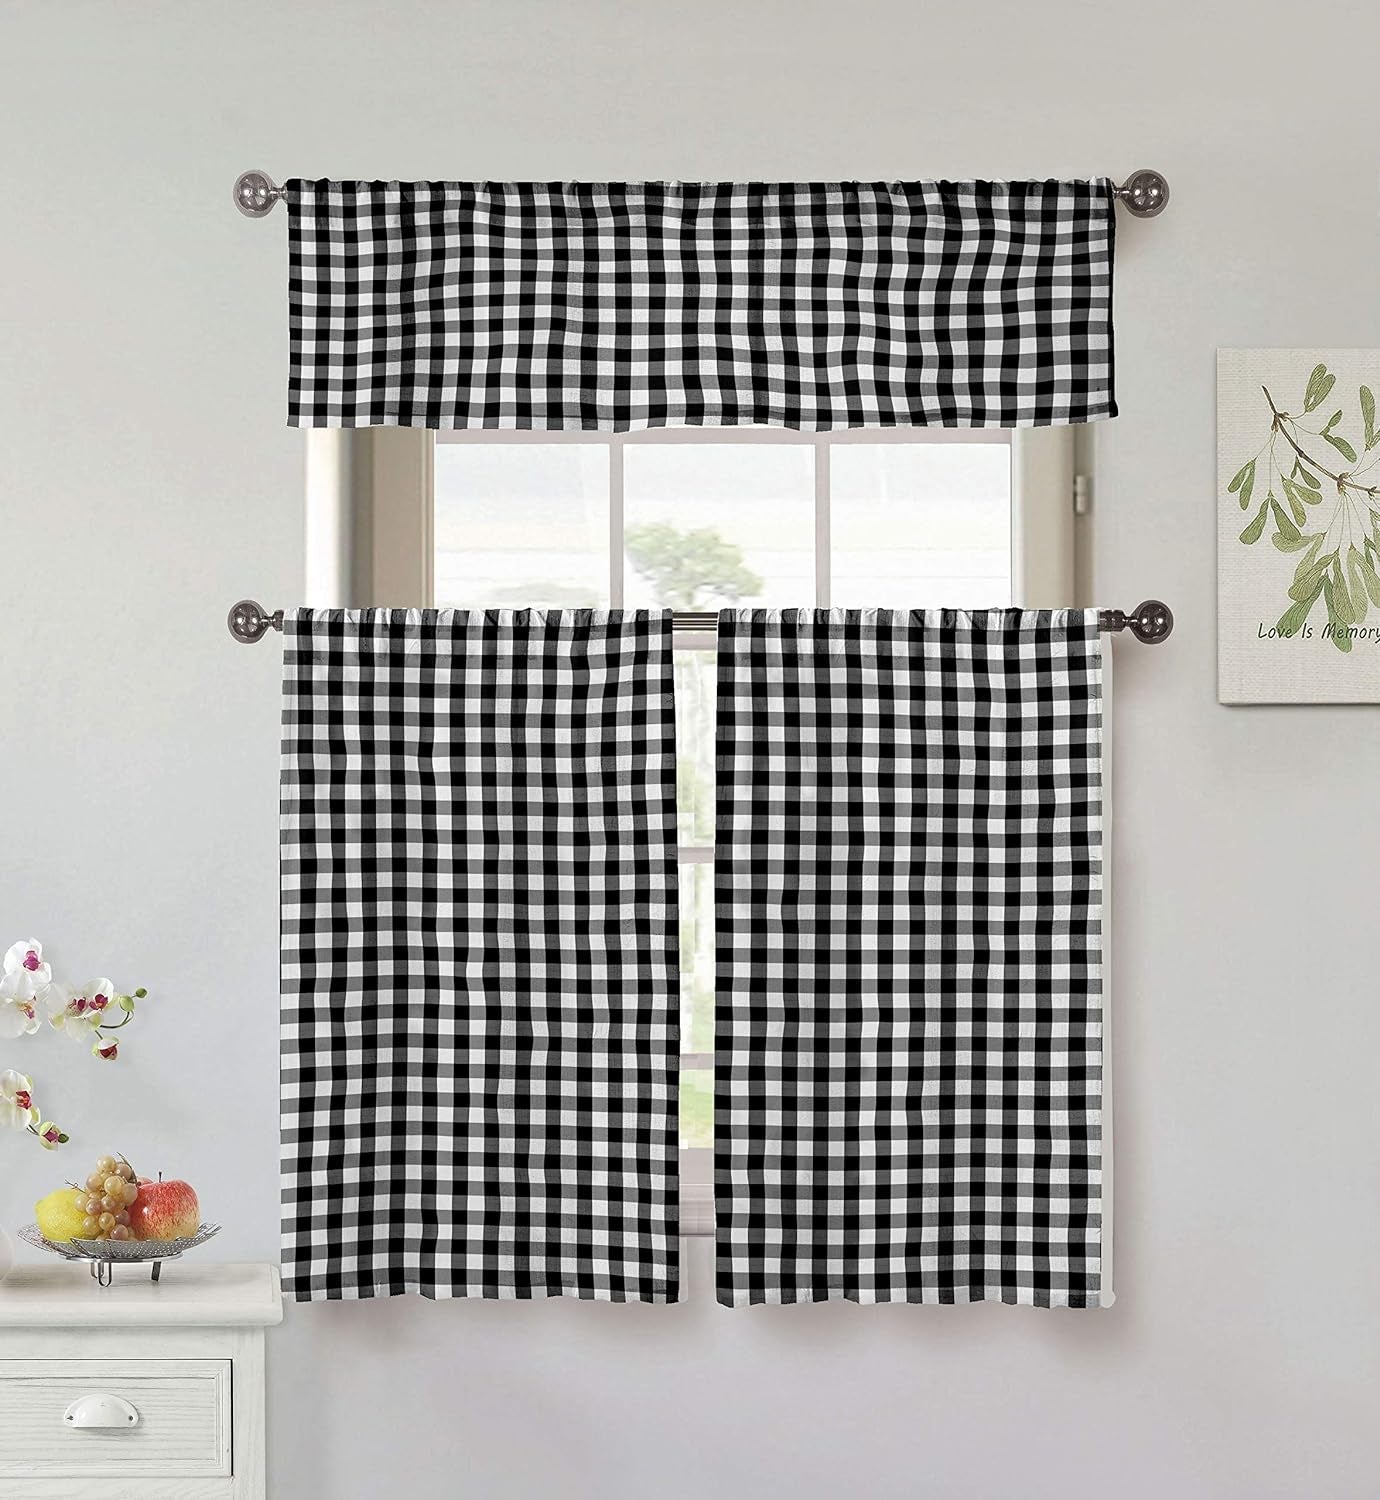 Grey and White Farmhouse Checkered Gingham Buffalo Plaid Window Treatment with Valances for Kitchen and Living Room 3 Piece Tier Set 58Wx51L Inches